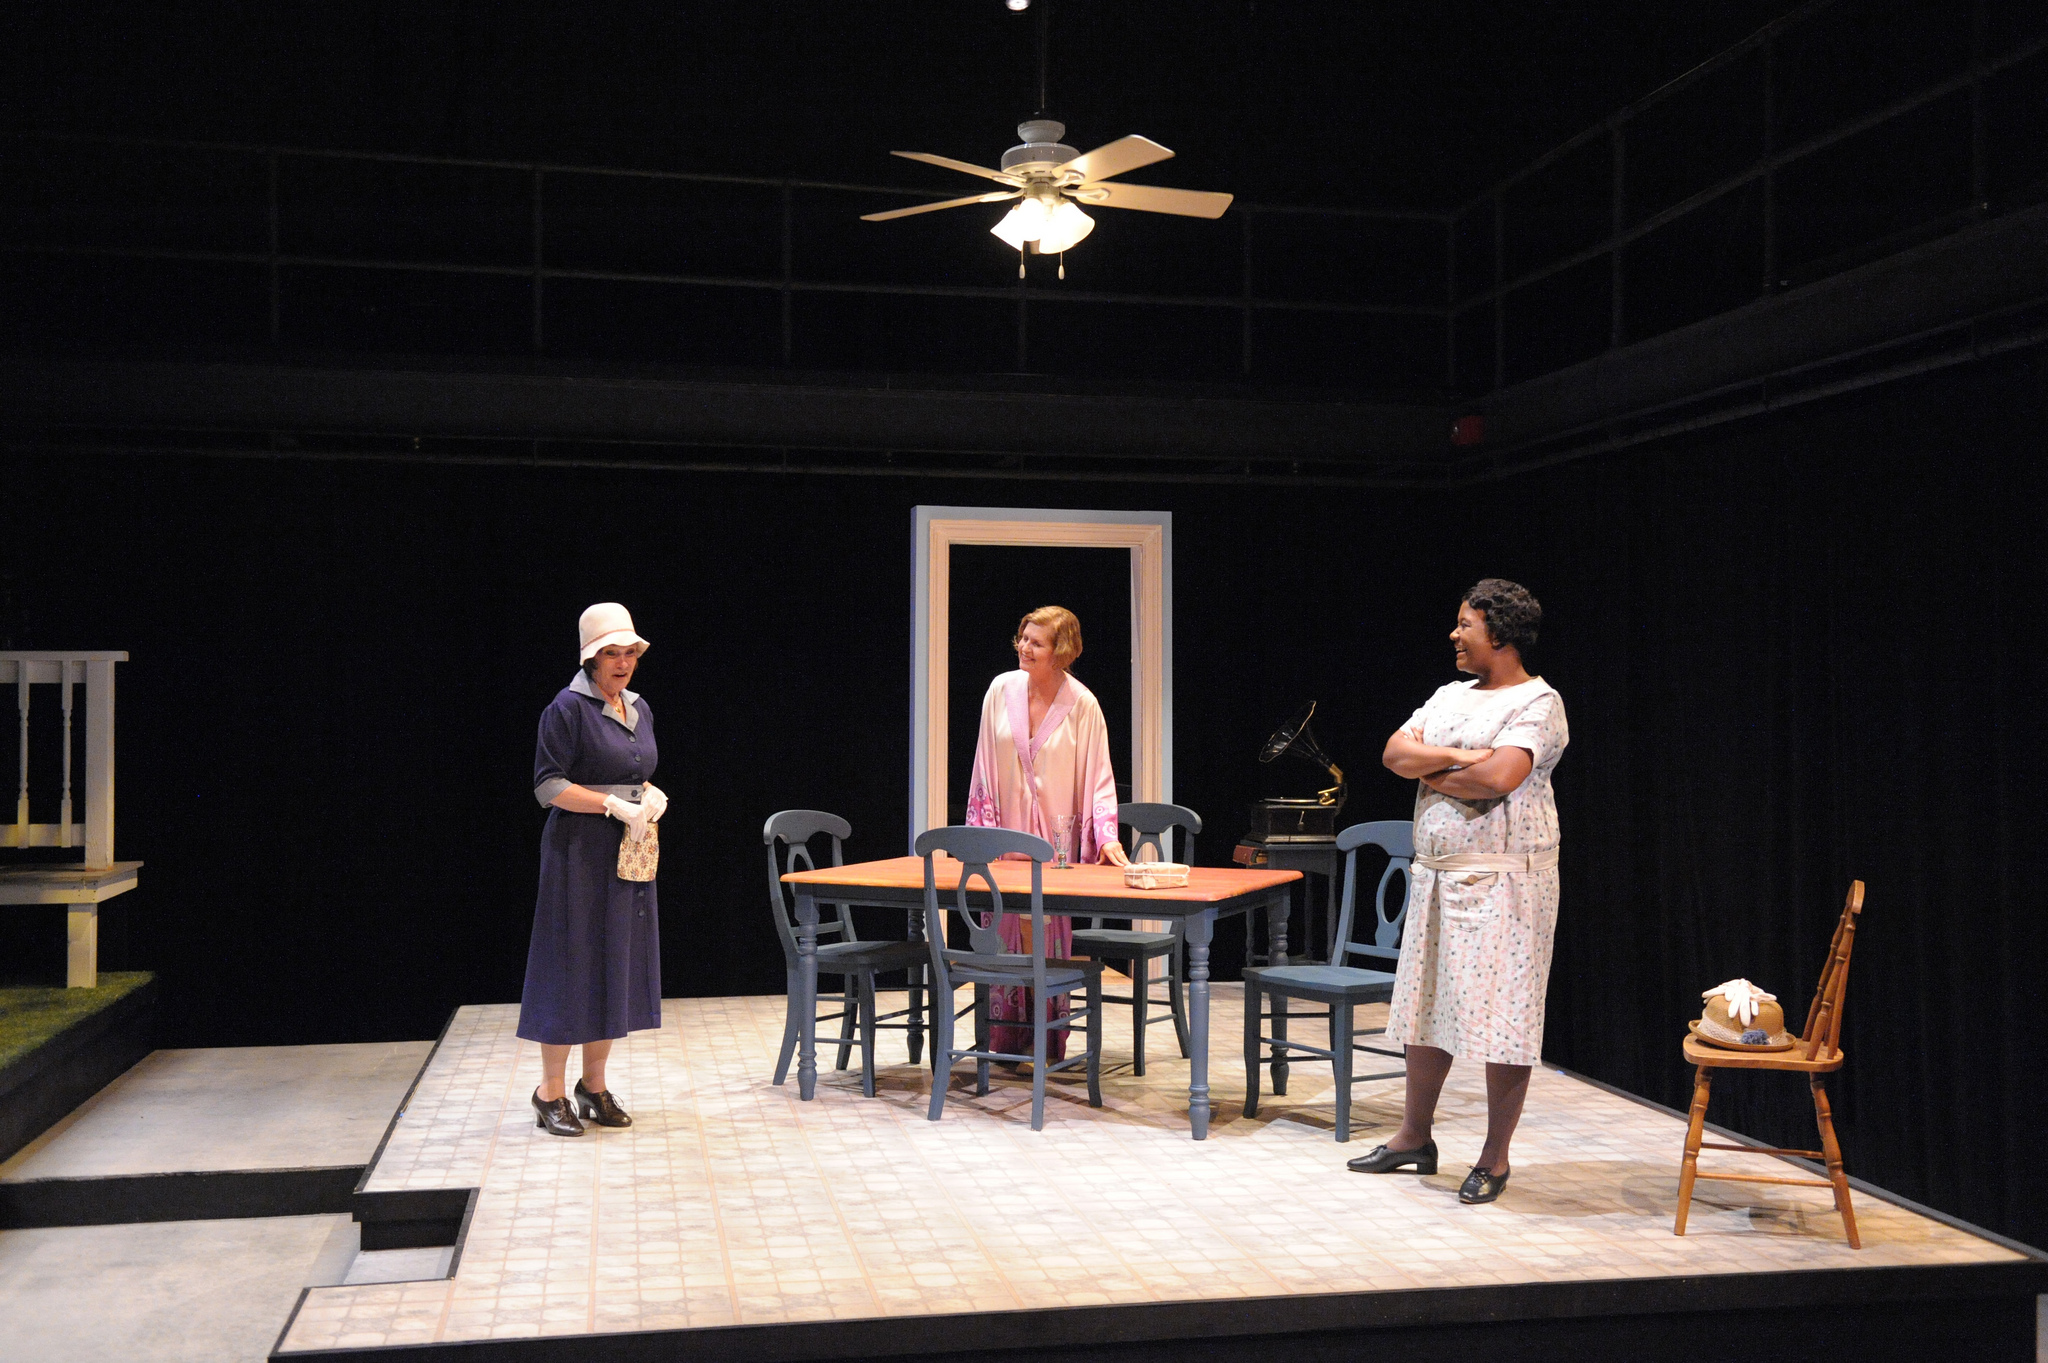 As Aunt Gert in A YOUNG LADY OF PROPERTY by Horton Foote at REP STAGE, with Marilyn Bennett and Erica McLaughlin